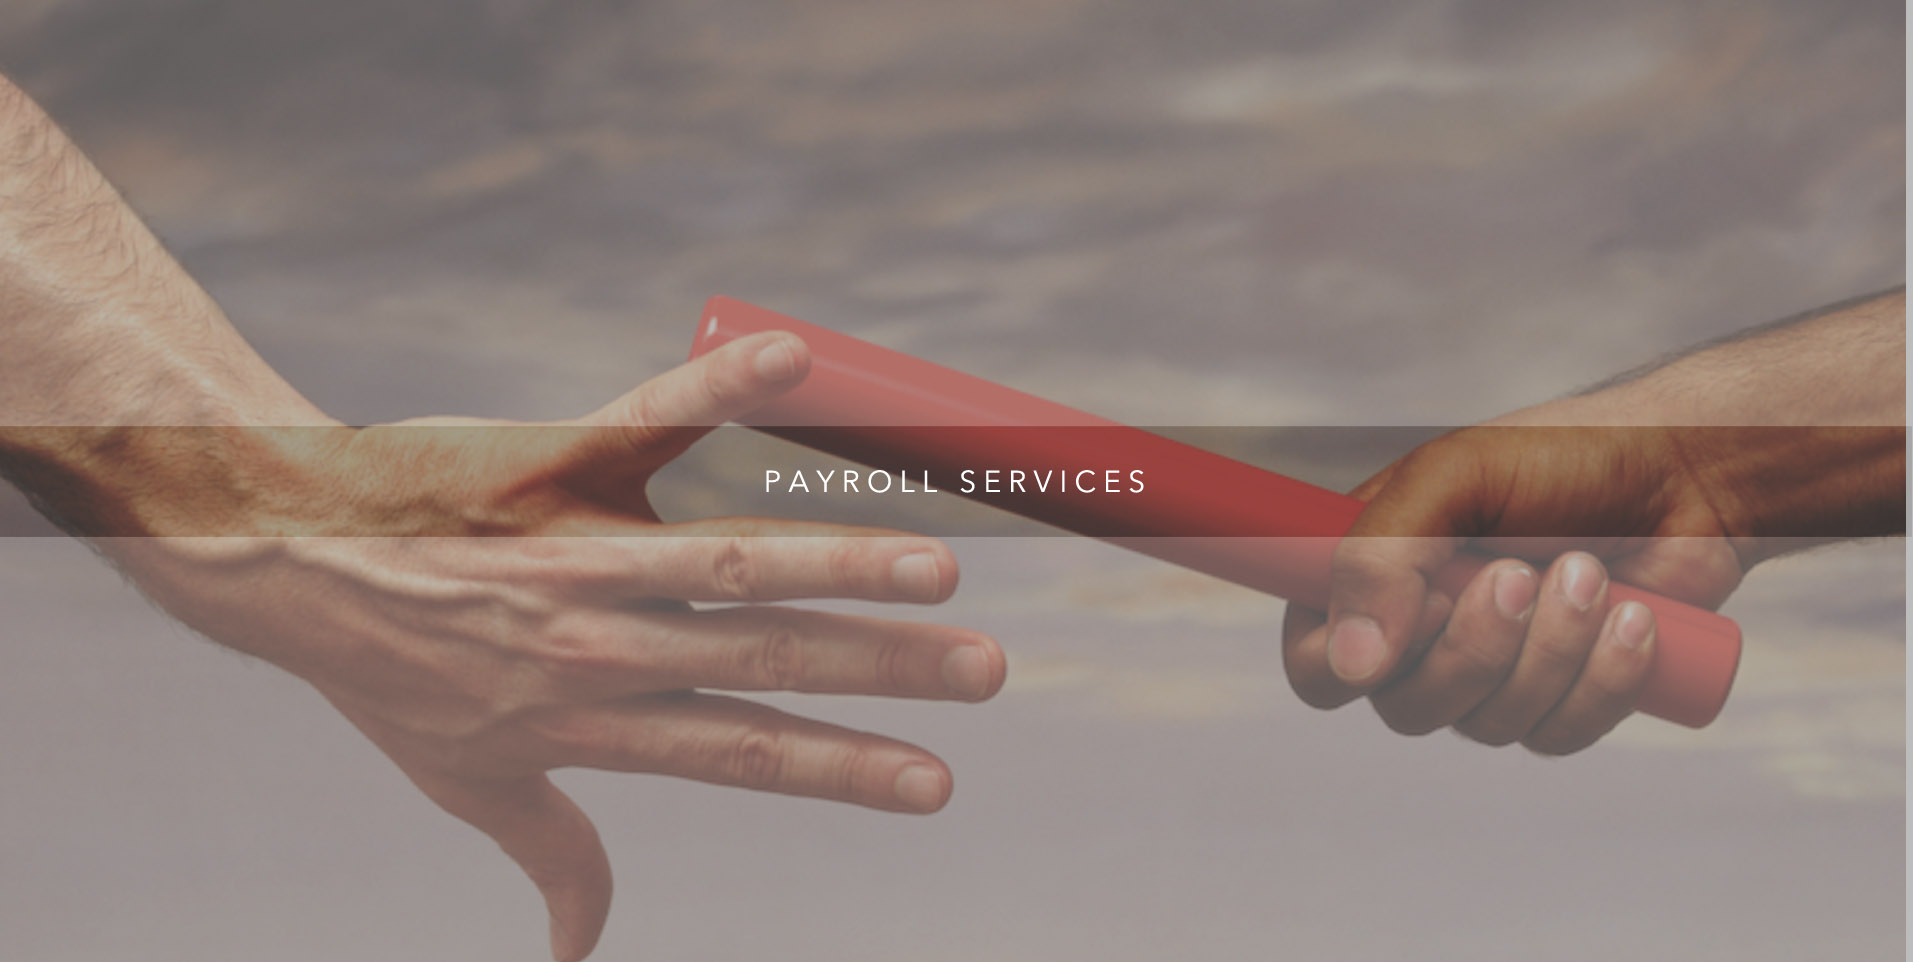 PAYROLL SERVICES